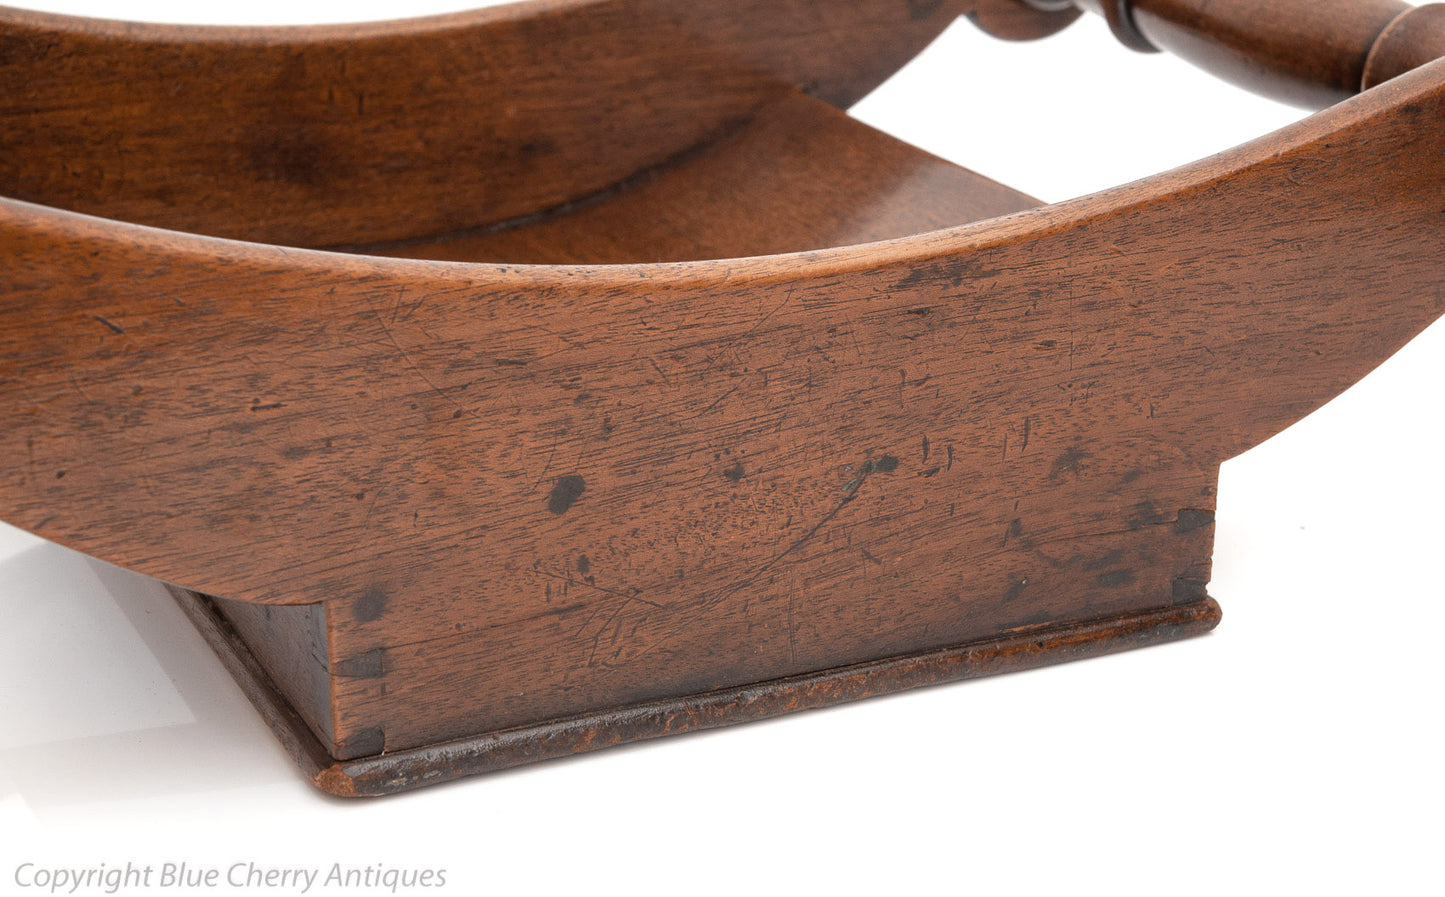 Georgian Antique Mahogany Wooden Cheese Coaster with Turned Handles c1780 (Code 1630)